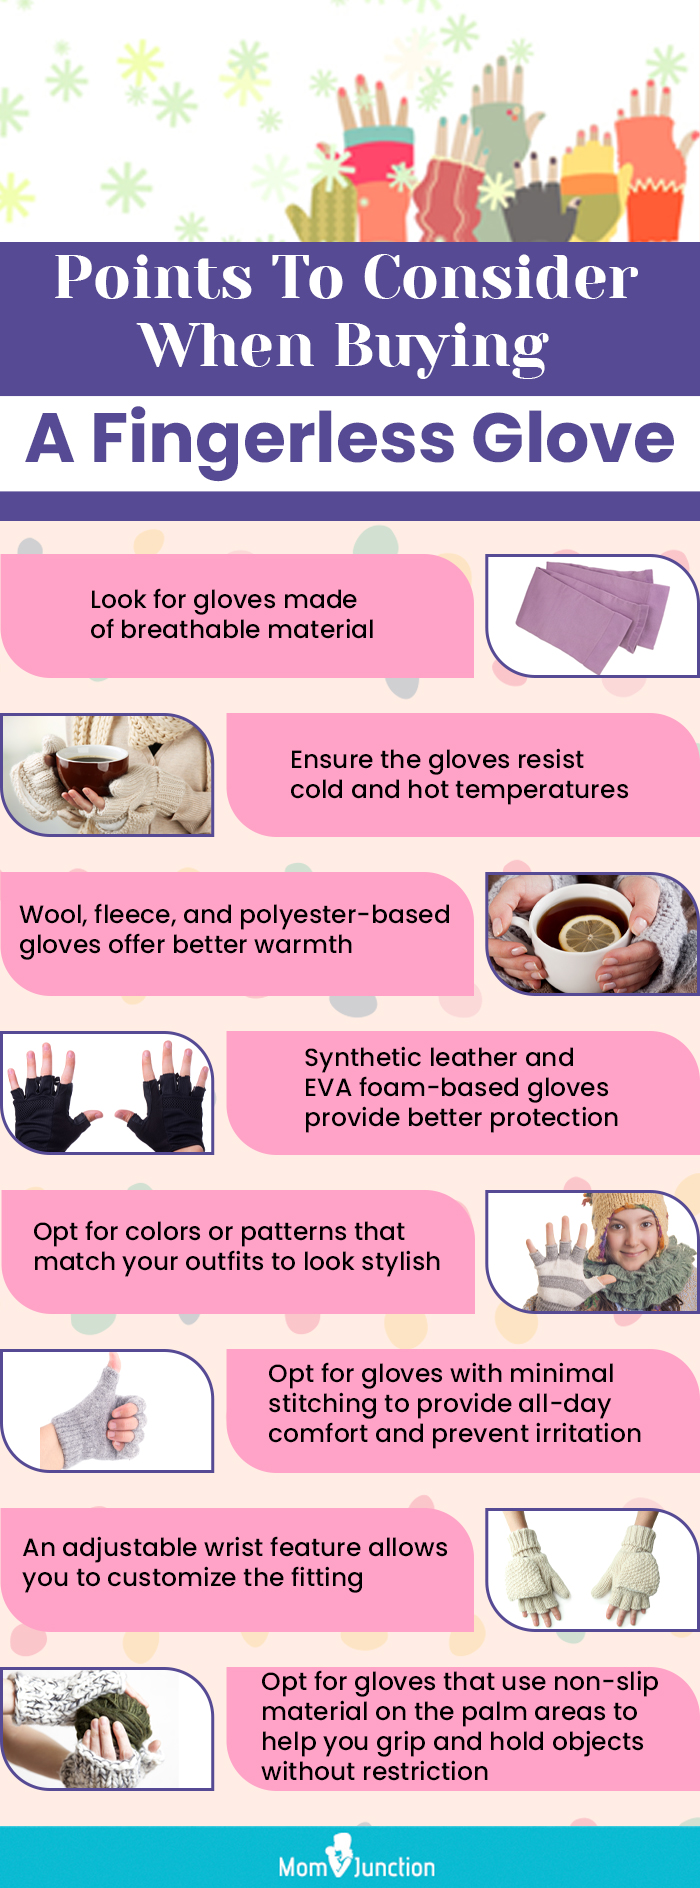 Points To Consider When Buying A Fingerless Glove